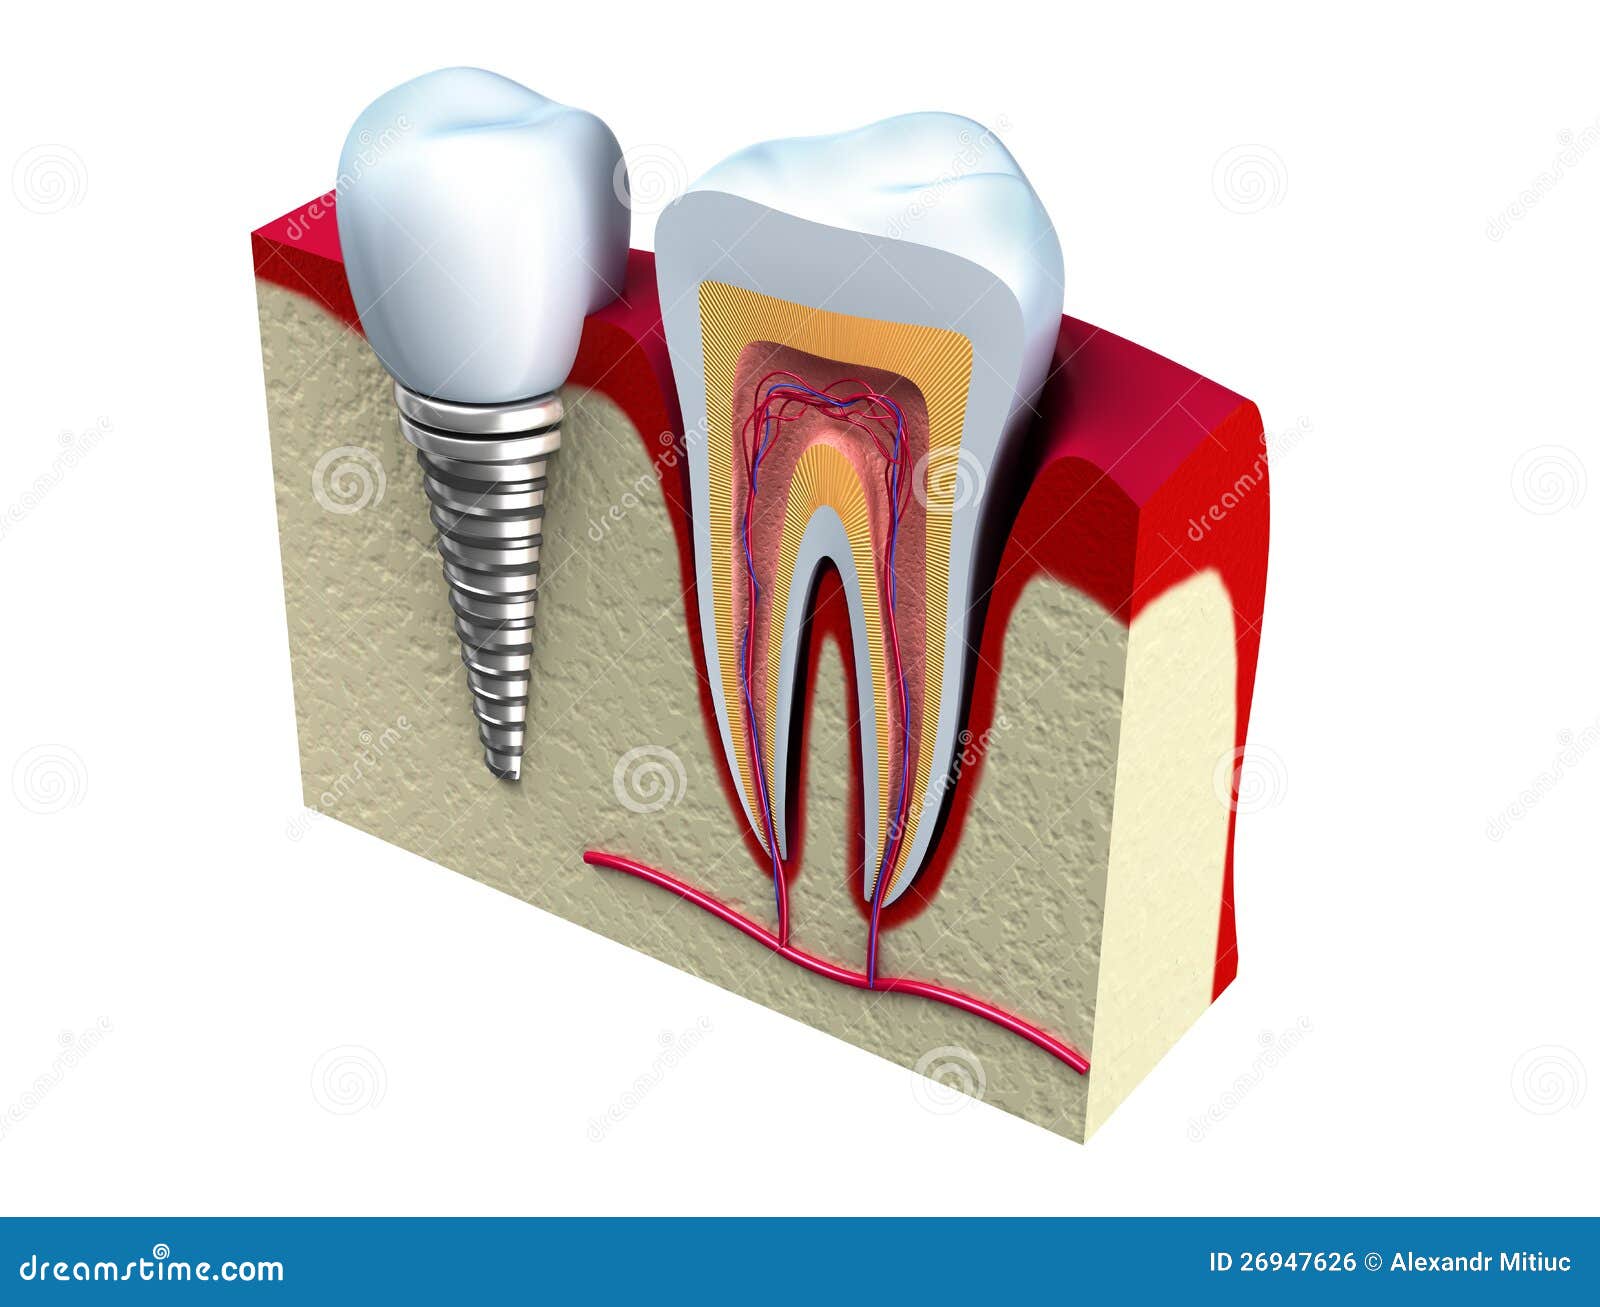 anatomy of healthy teeth and dental implant in jaw